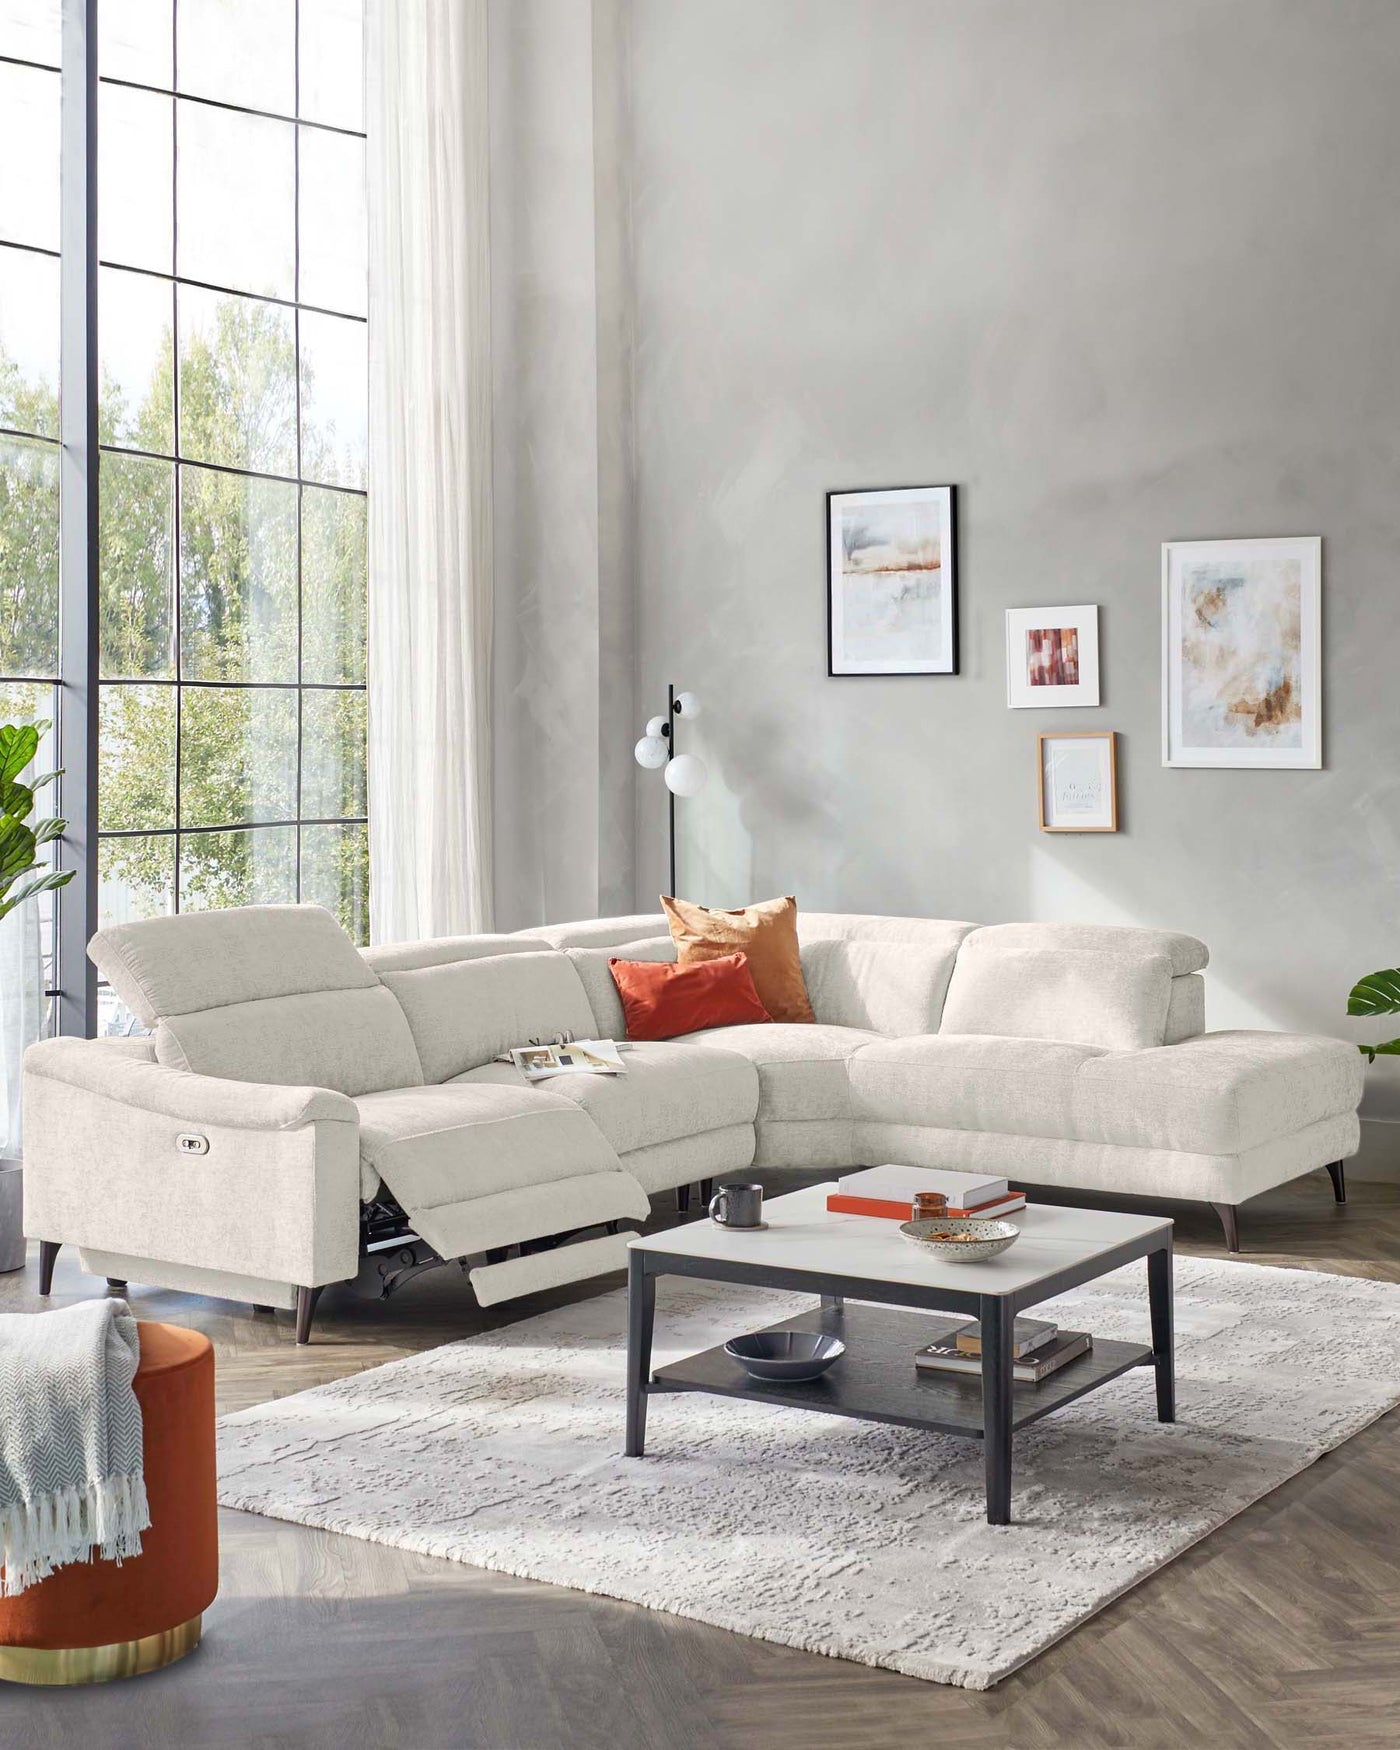 Modern light grey sectional sofa with adjustable headrests, complemented by a terracotta cylindrical side table with a metallic base. In the centre, there is a minimalist black-framed coffee table with a white top, featuring a lower shelf. The set rests on a textured off-white area rug.